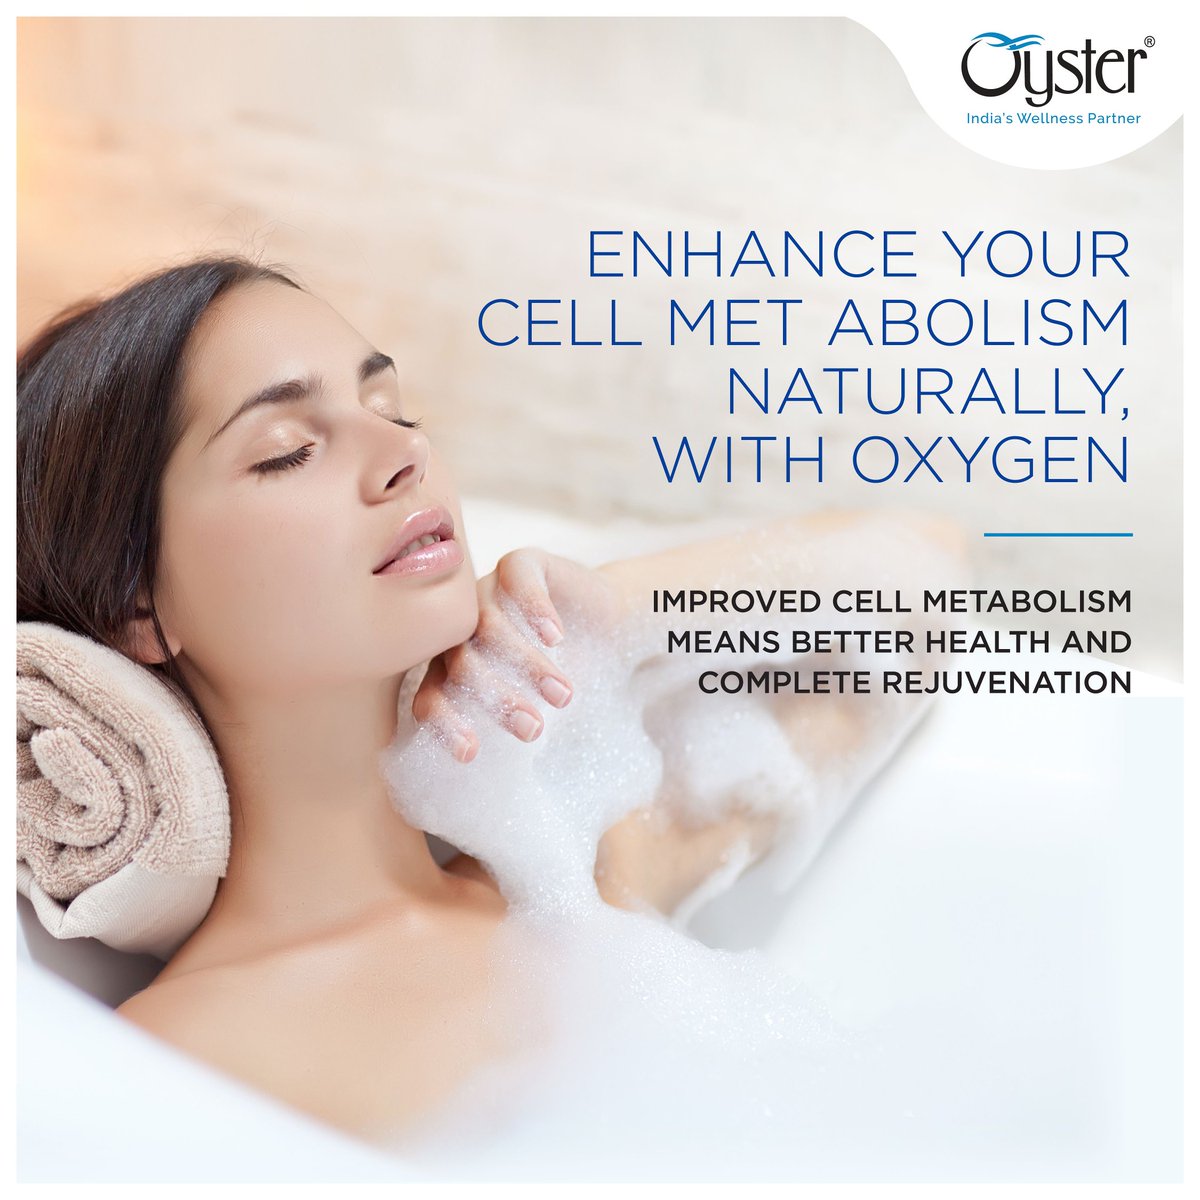 Oxyjet by Oyster supplies pure oxygen to the skin. Pure oxygen transforms into energy that improves body metabolism, promotes cell recovery and stimulates the immunity system. 

#oysterwellness #oysterbath #oxyjet #oxygenatedwater #microbubbles #oxygenrichwater #bathingexperience